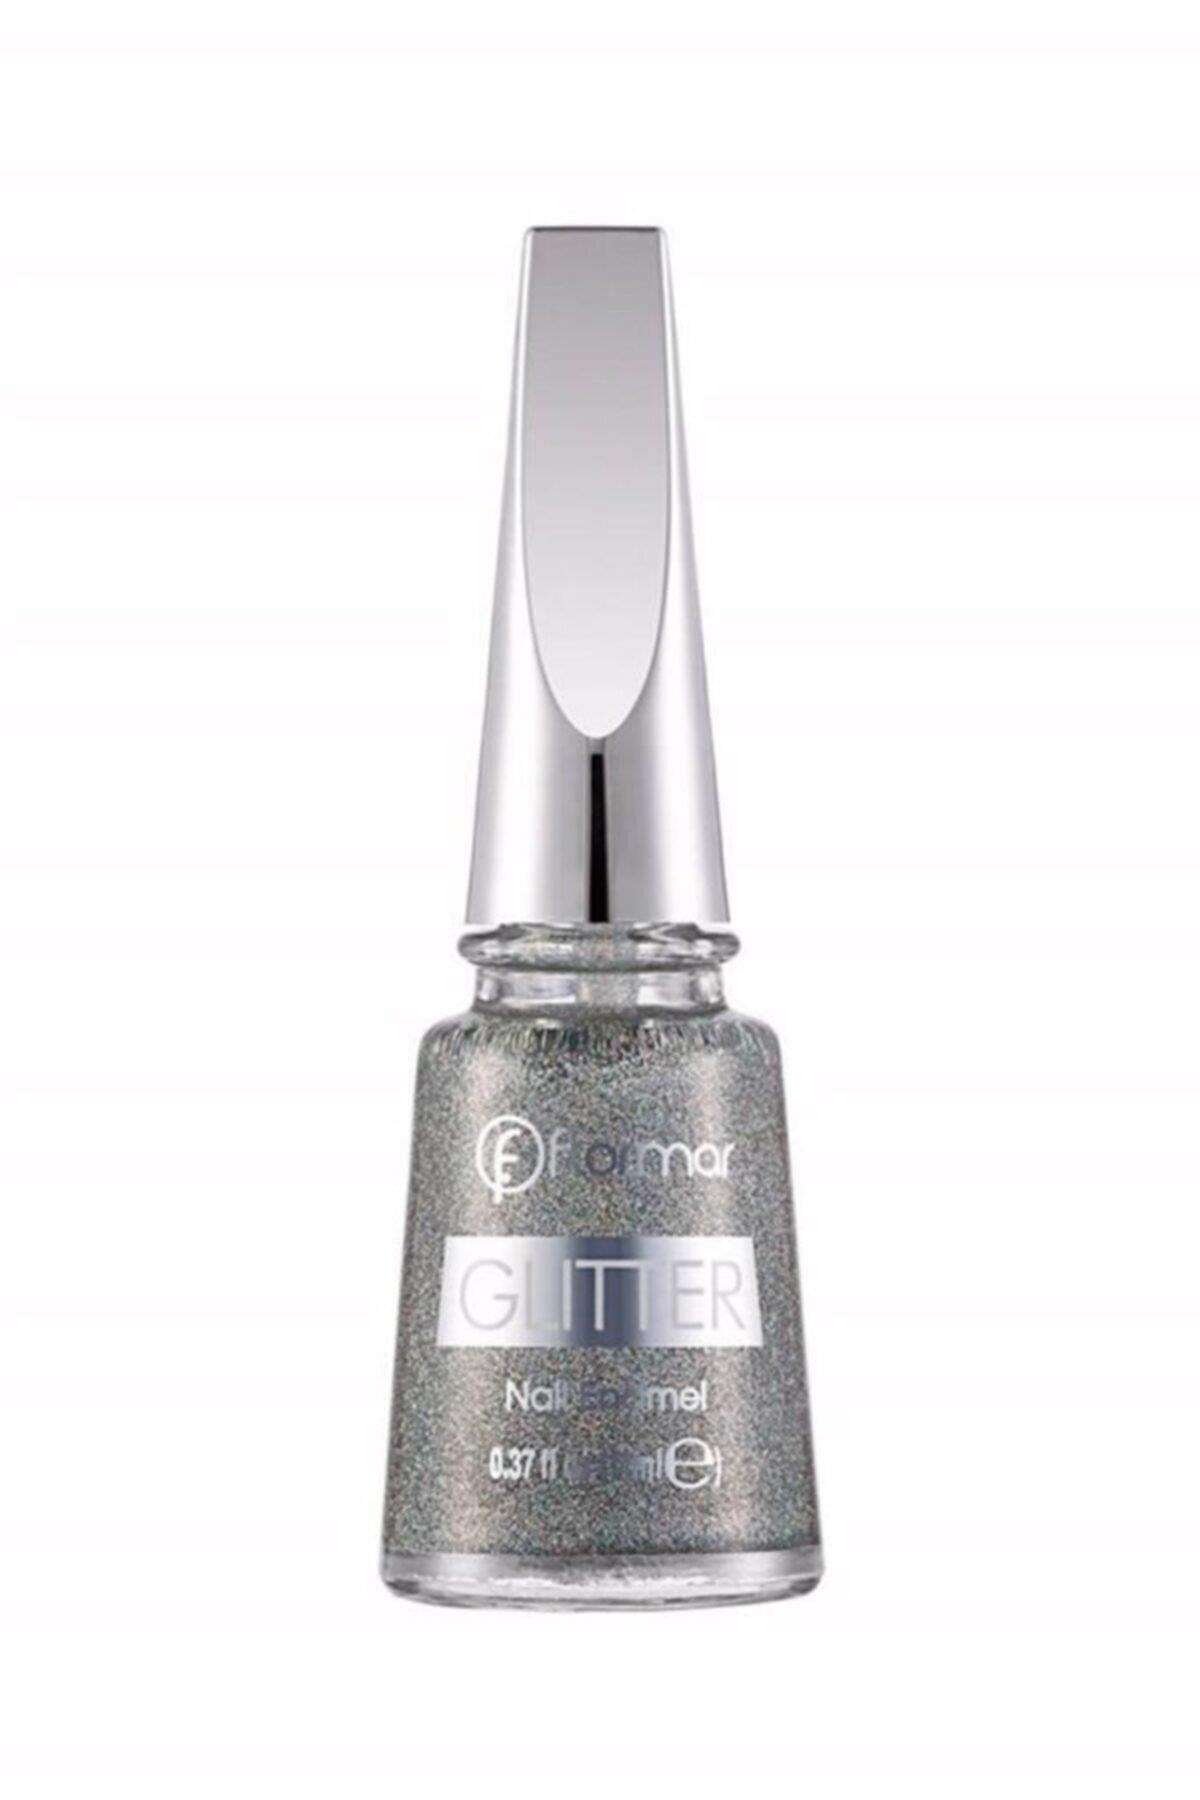 Flormar Glitter 38 Holographic Silver